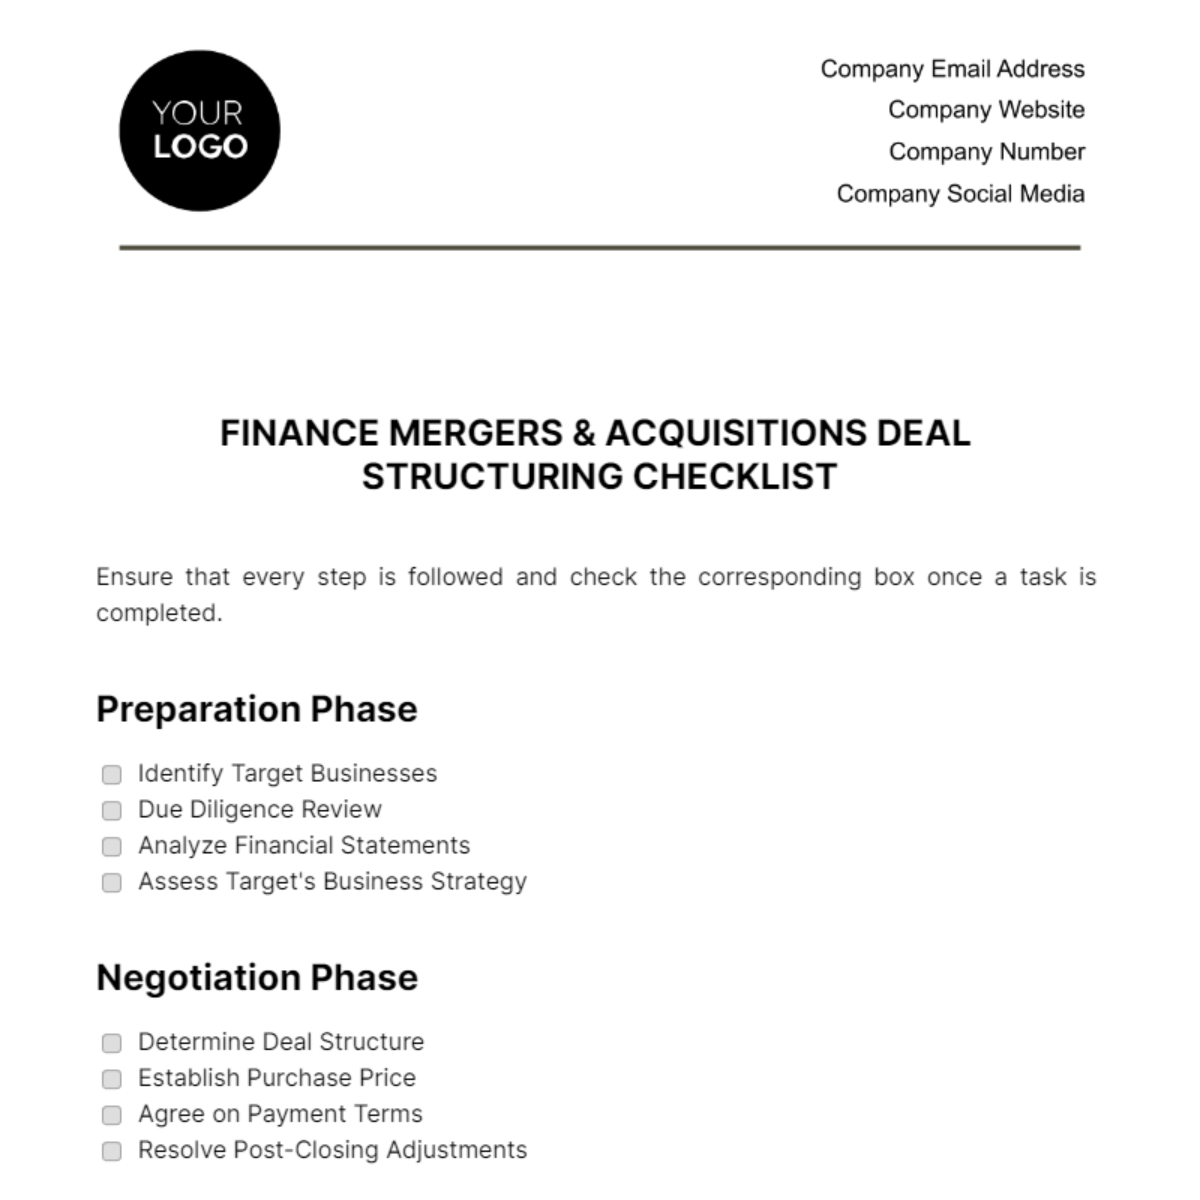 Finance Mergers & Acquisitions Deal Structuring Checklist Template